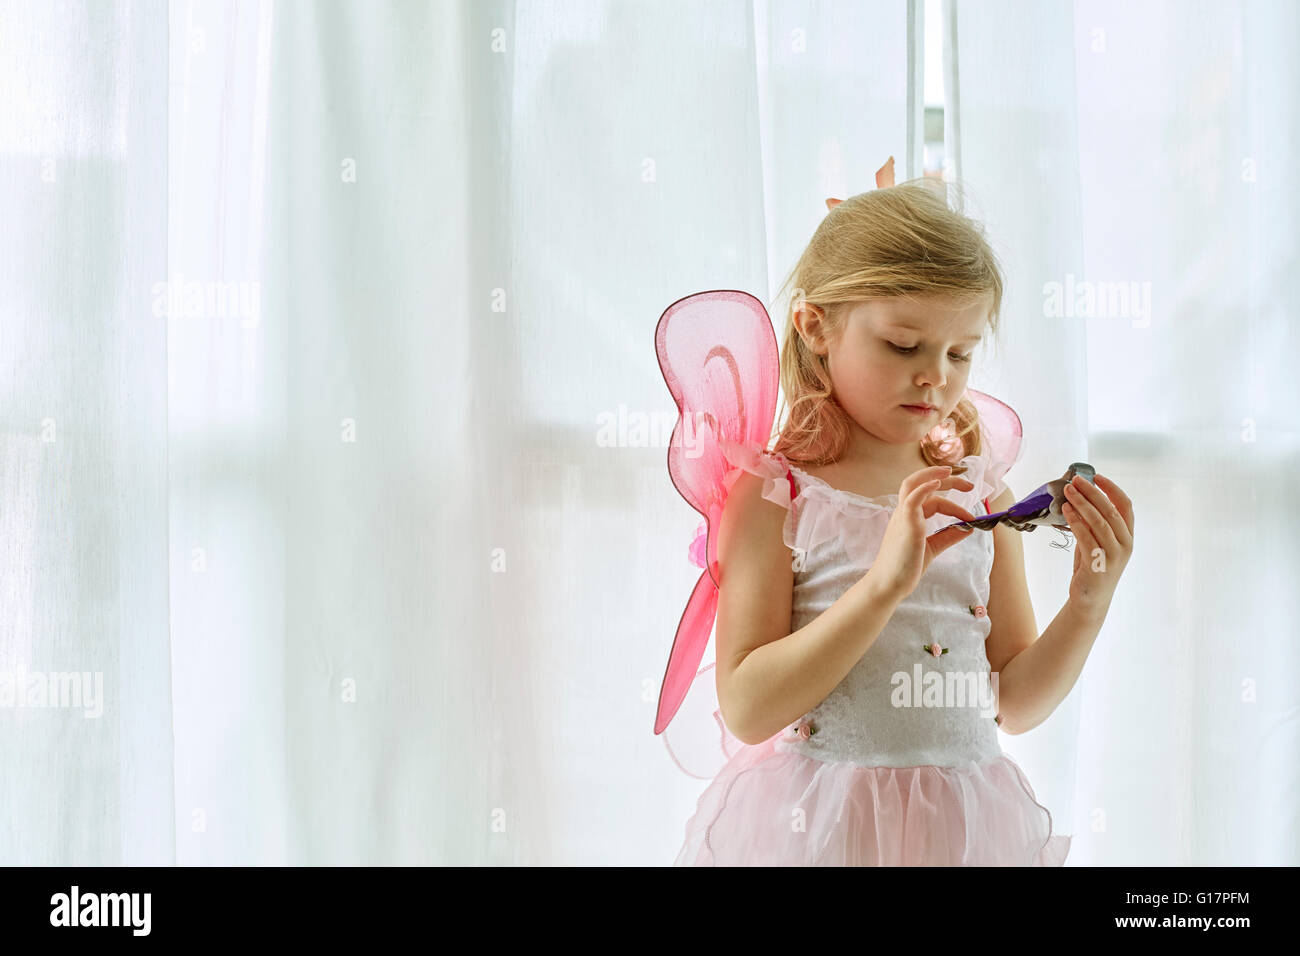 Girl in fairy costume playing by curtain Stock Photo